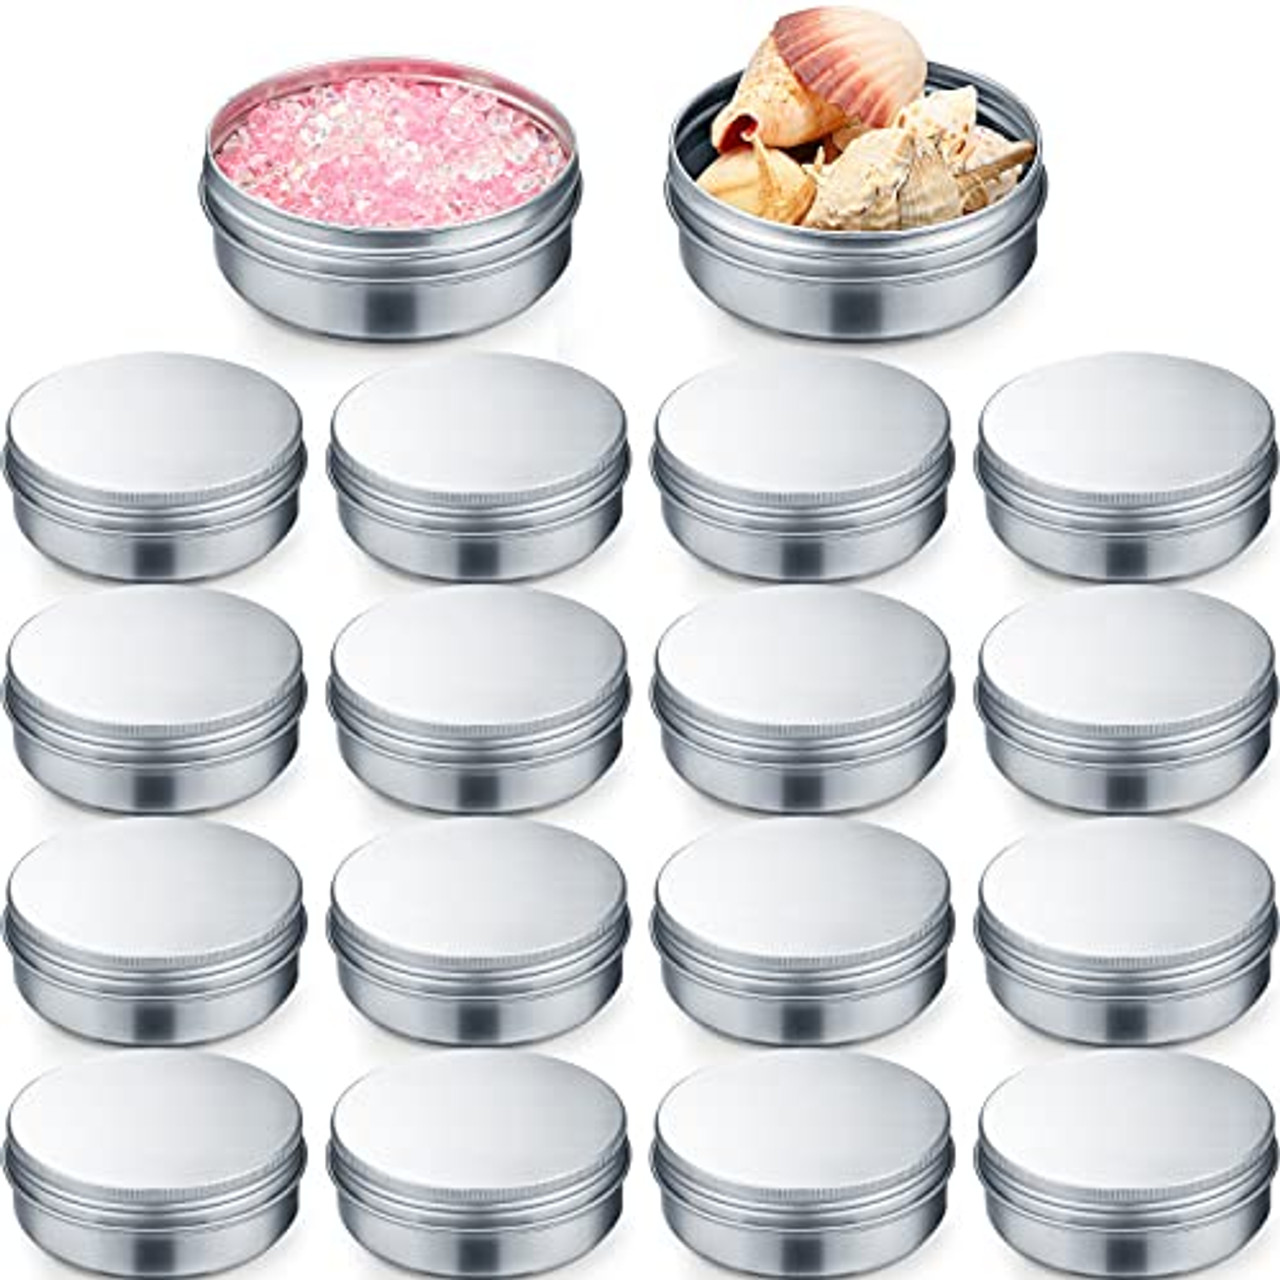 10Pcs/lots 5g-60g Metal Round Cosmetic Tins Aluminum Empty Candles Cans  Storage Jars with Screw Lids For Lip Balm Salve Spices - AliExpress